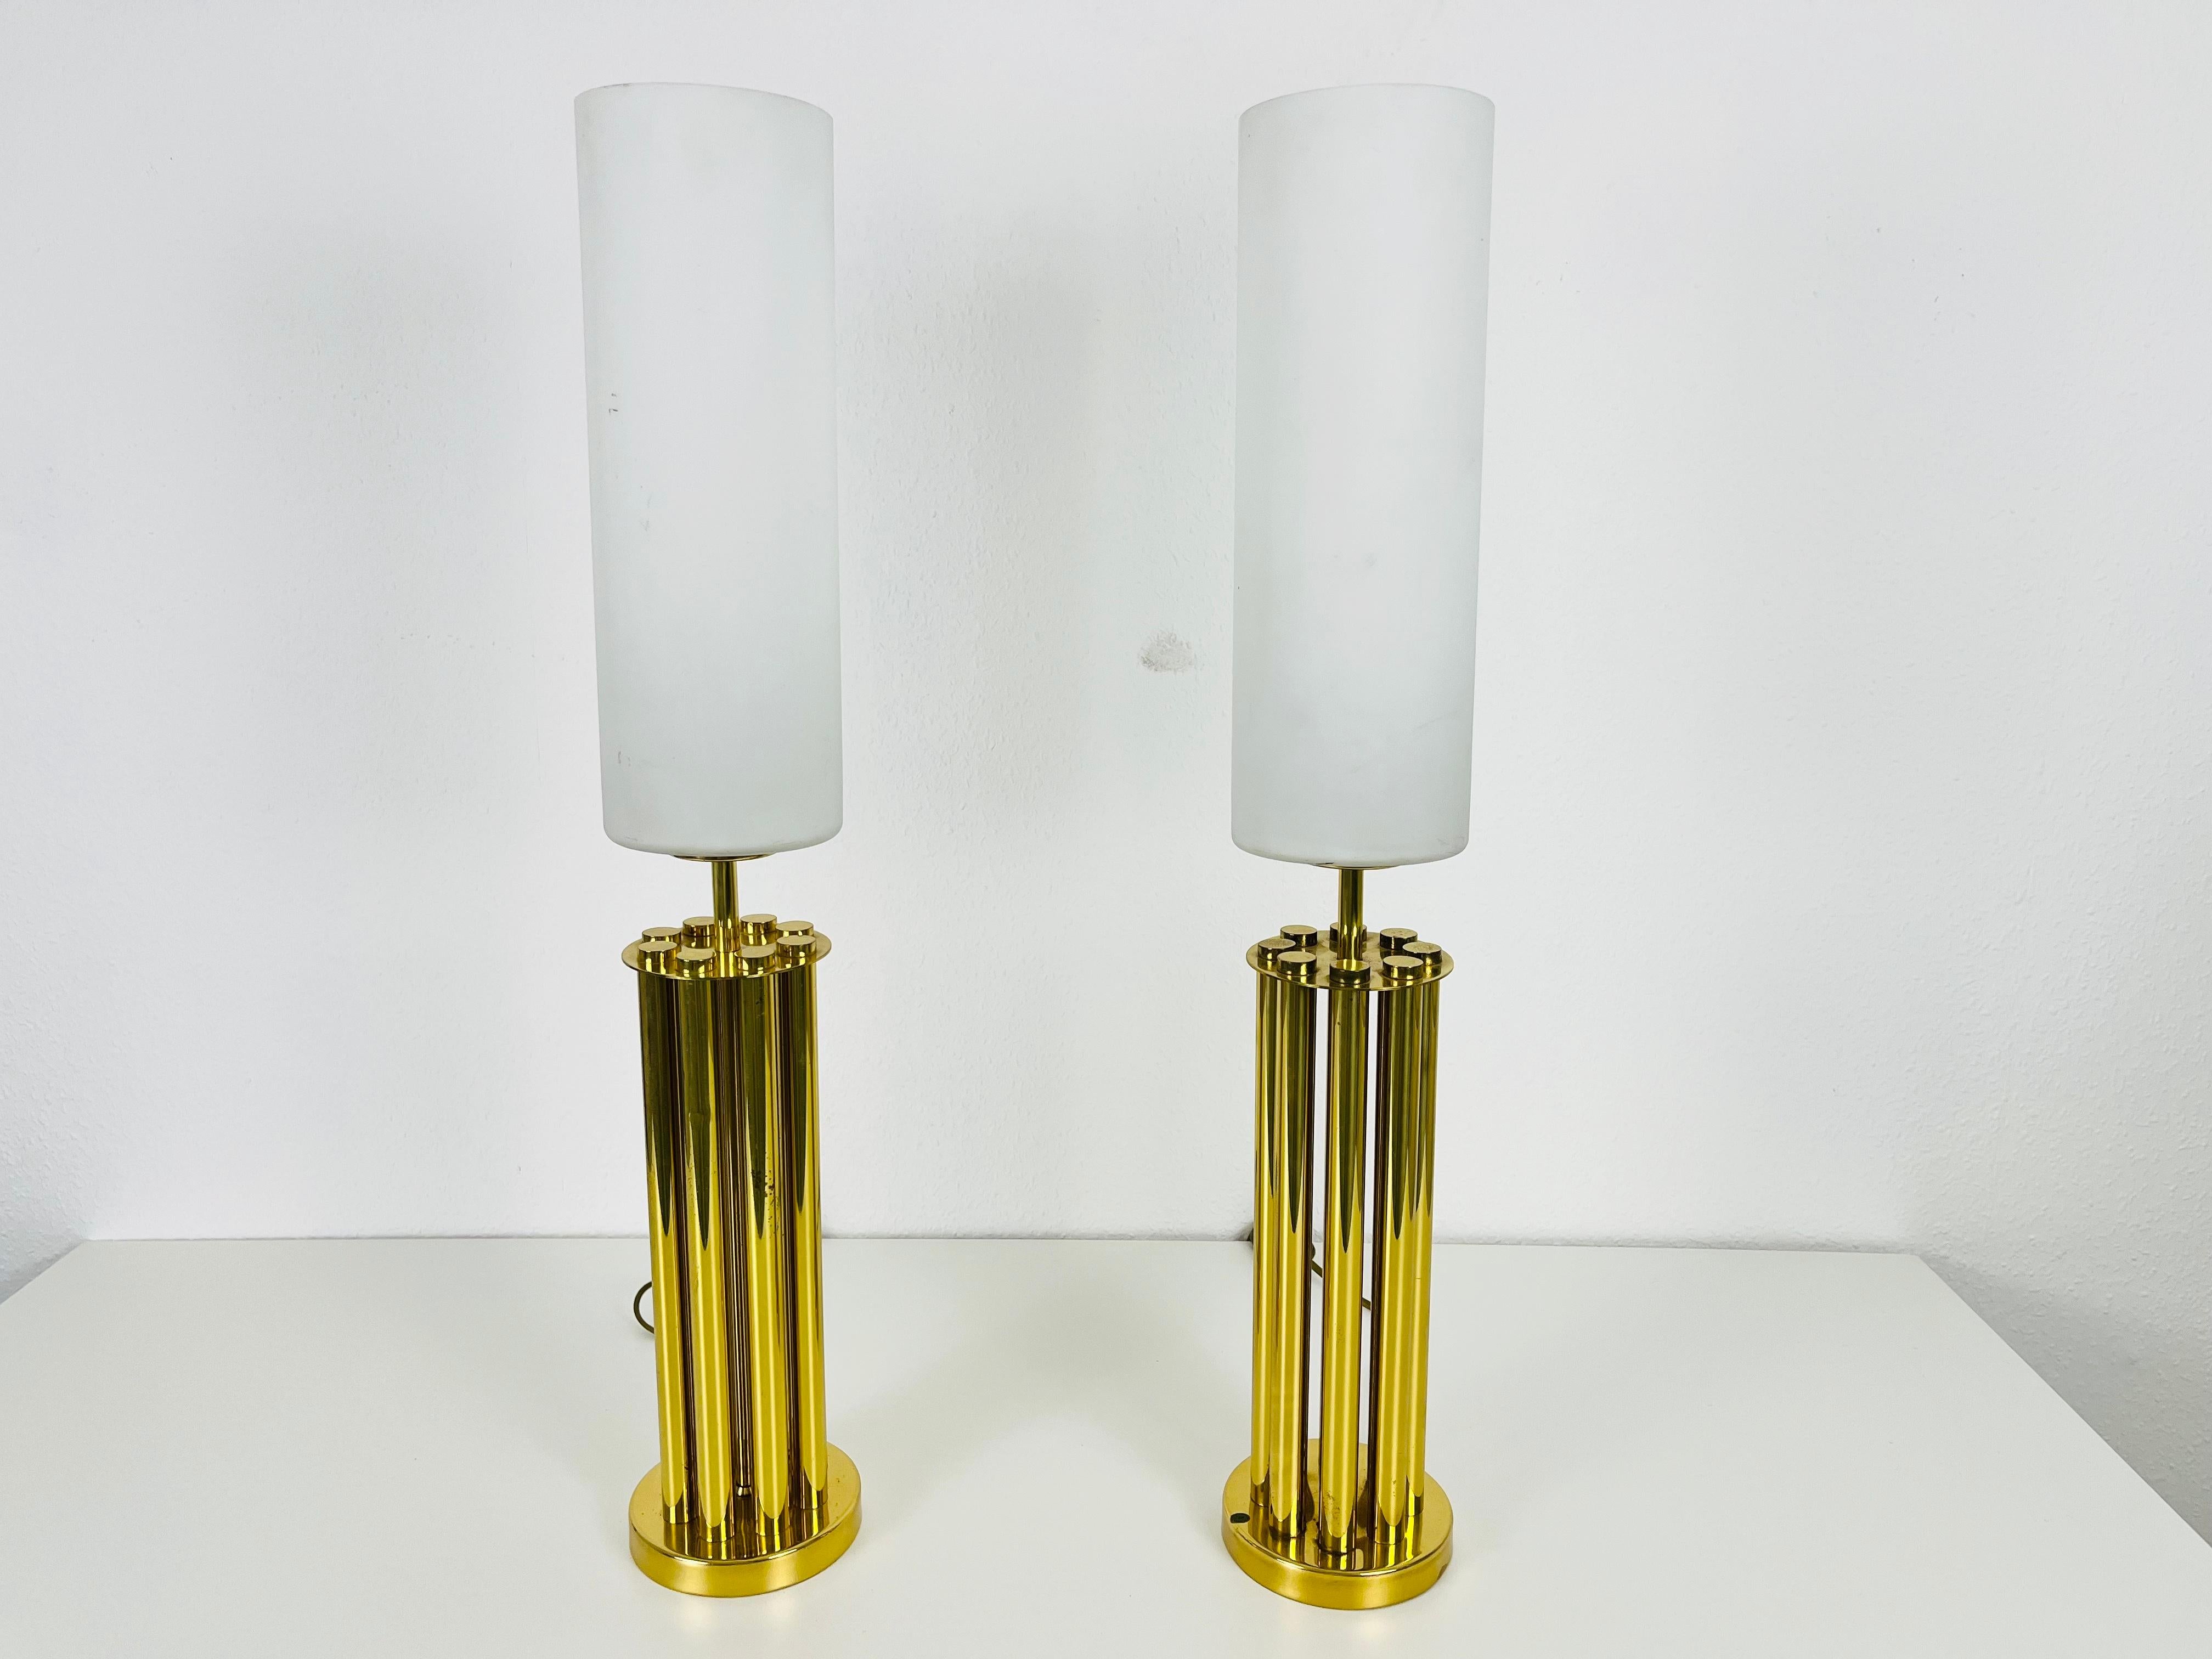 A beautiful pair of midcentury table lamps made in France in the 1960s. It is fascinating with its beautiful pillar shape. The table lamps are made of polished brass and opaline glass.

Measurements:

Base diameter 12 cm

Height 74 cm

Good